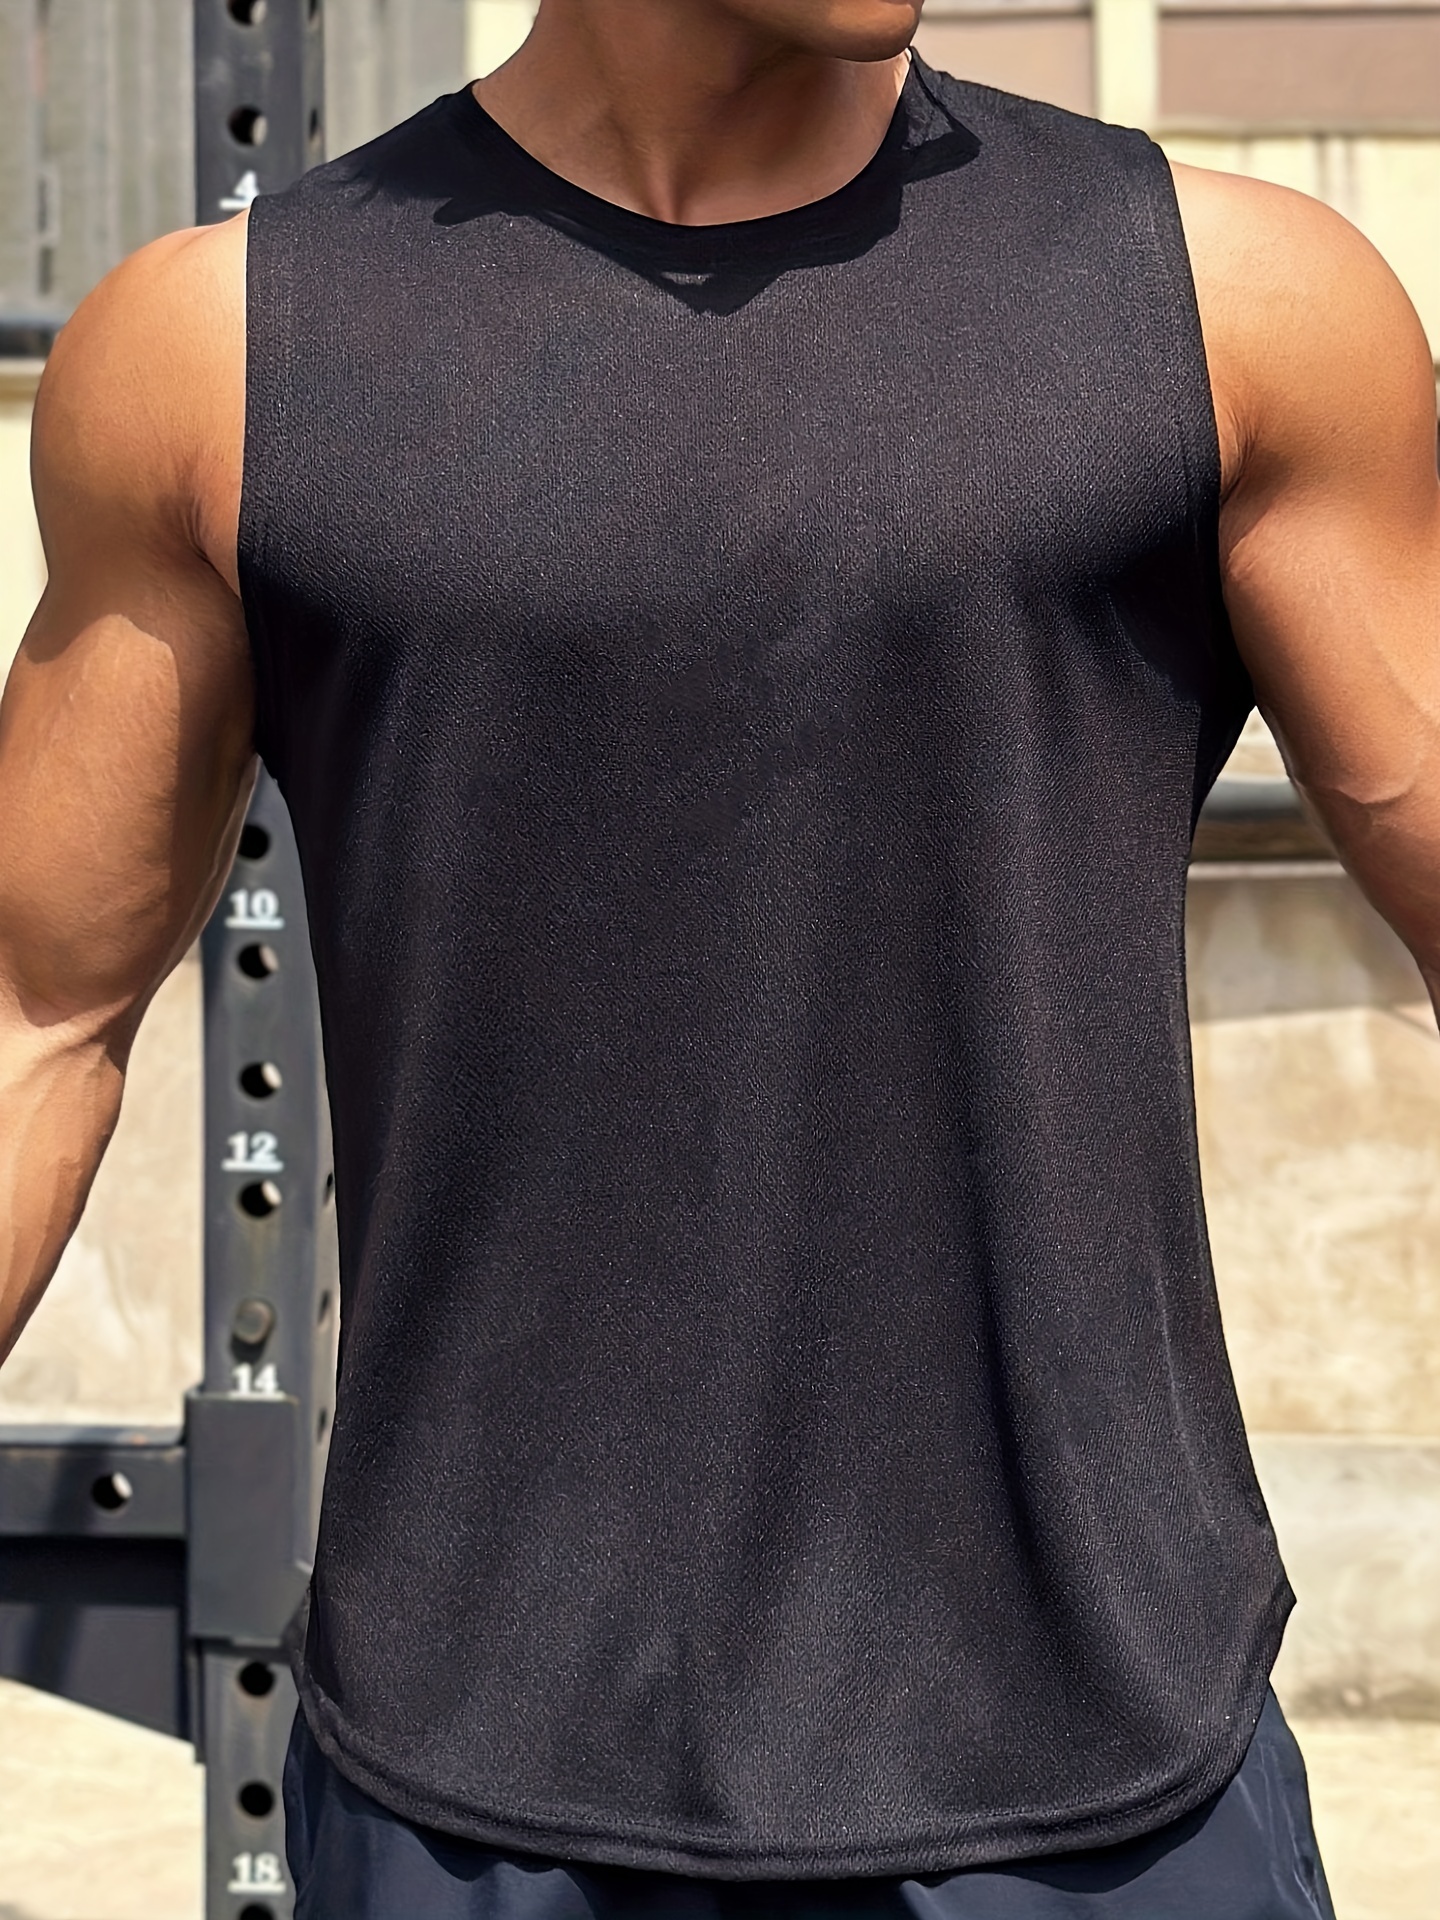 Muscle Sleeveless Workout Shirts Tank Tops for Men  Athletic Gym  Bodybuilding Training Compression Tops - 100% Cotton (Small, Black) 